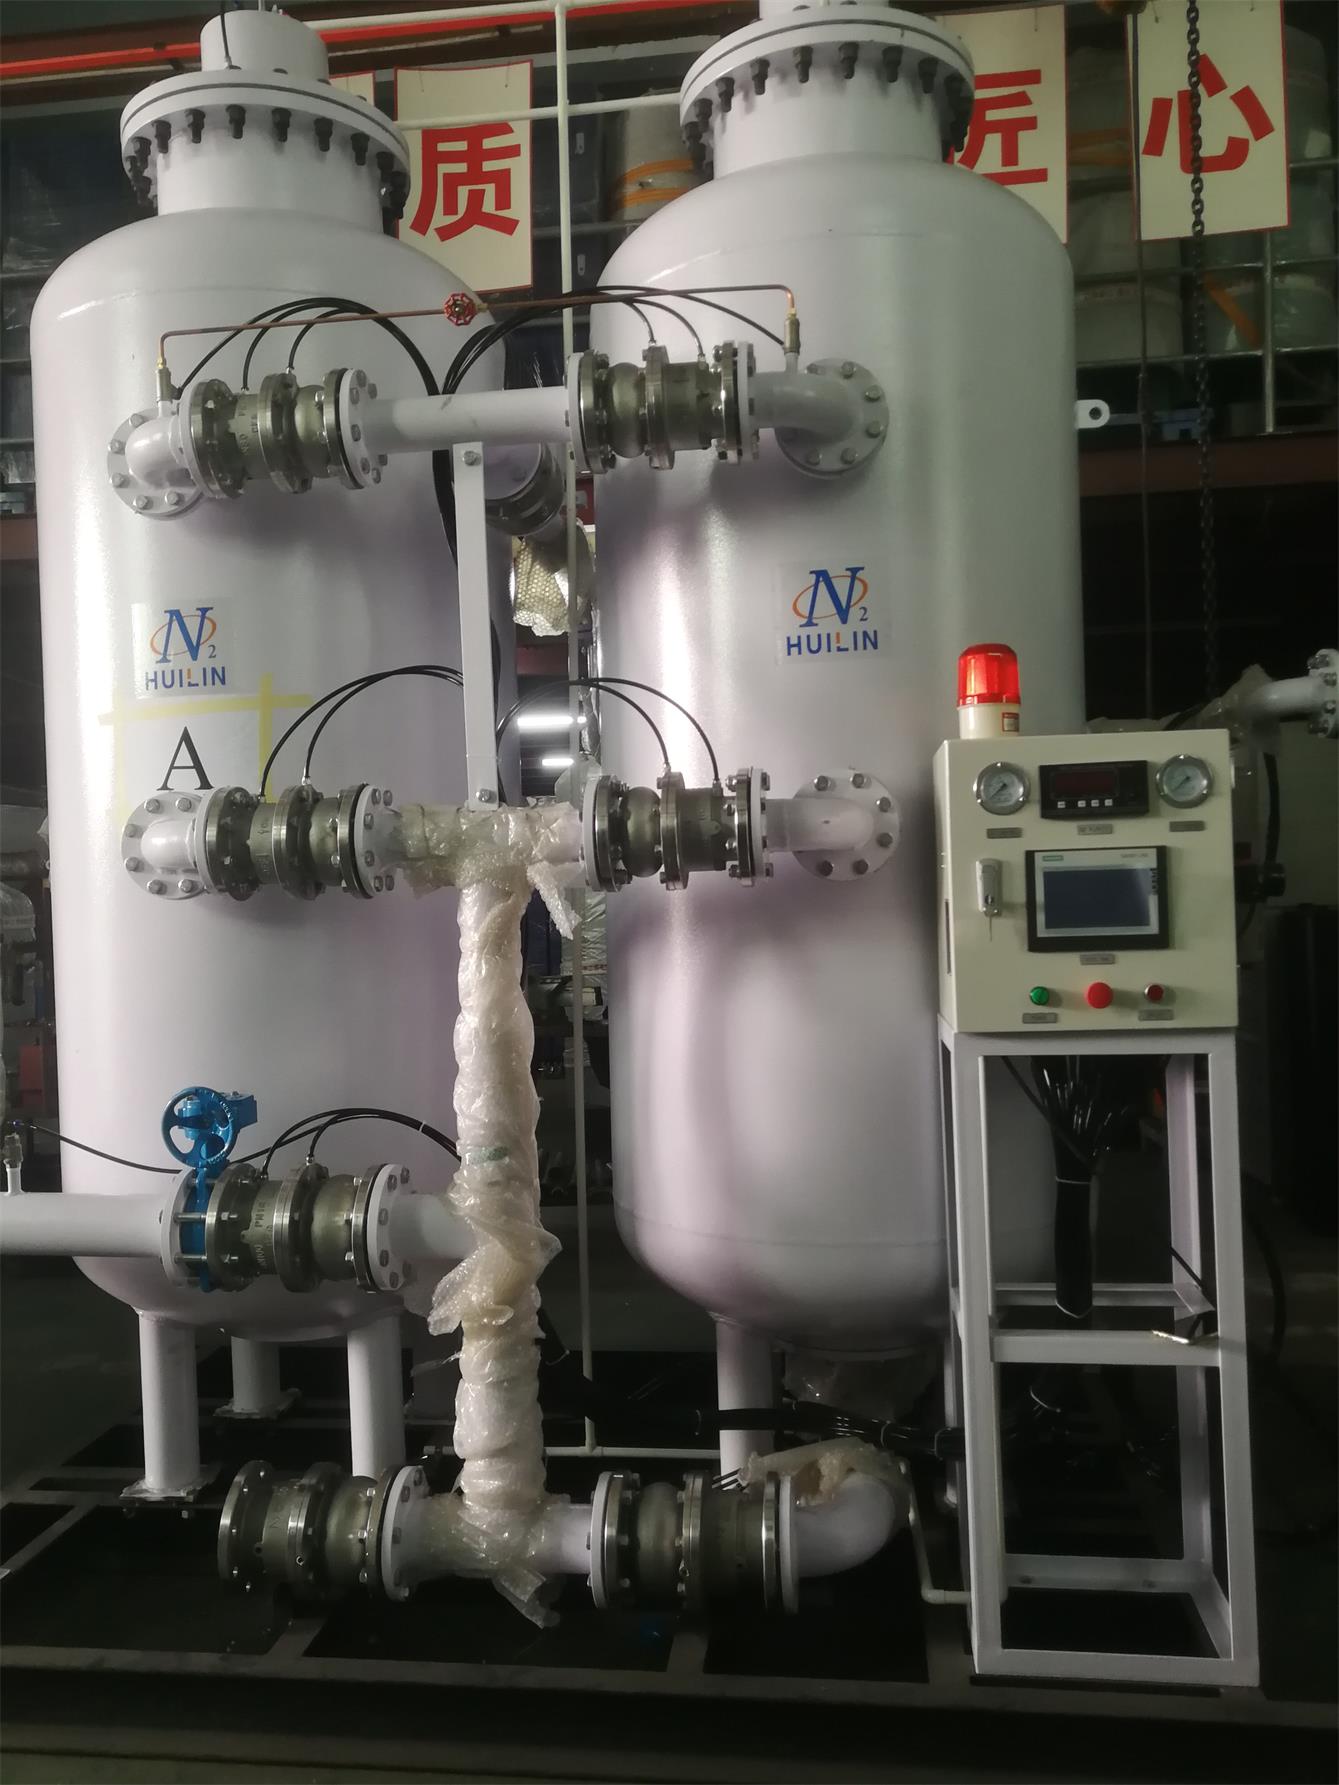 Commissioning of 4 sets of oxygen generators in Lhasa, Tibet has been completed